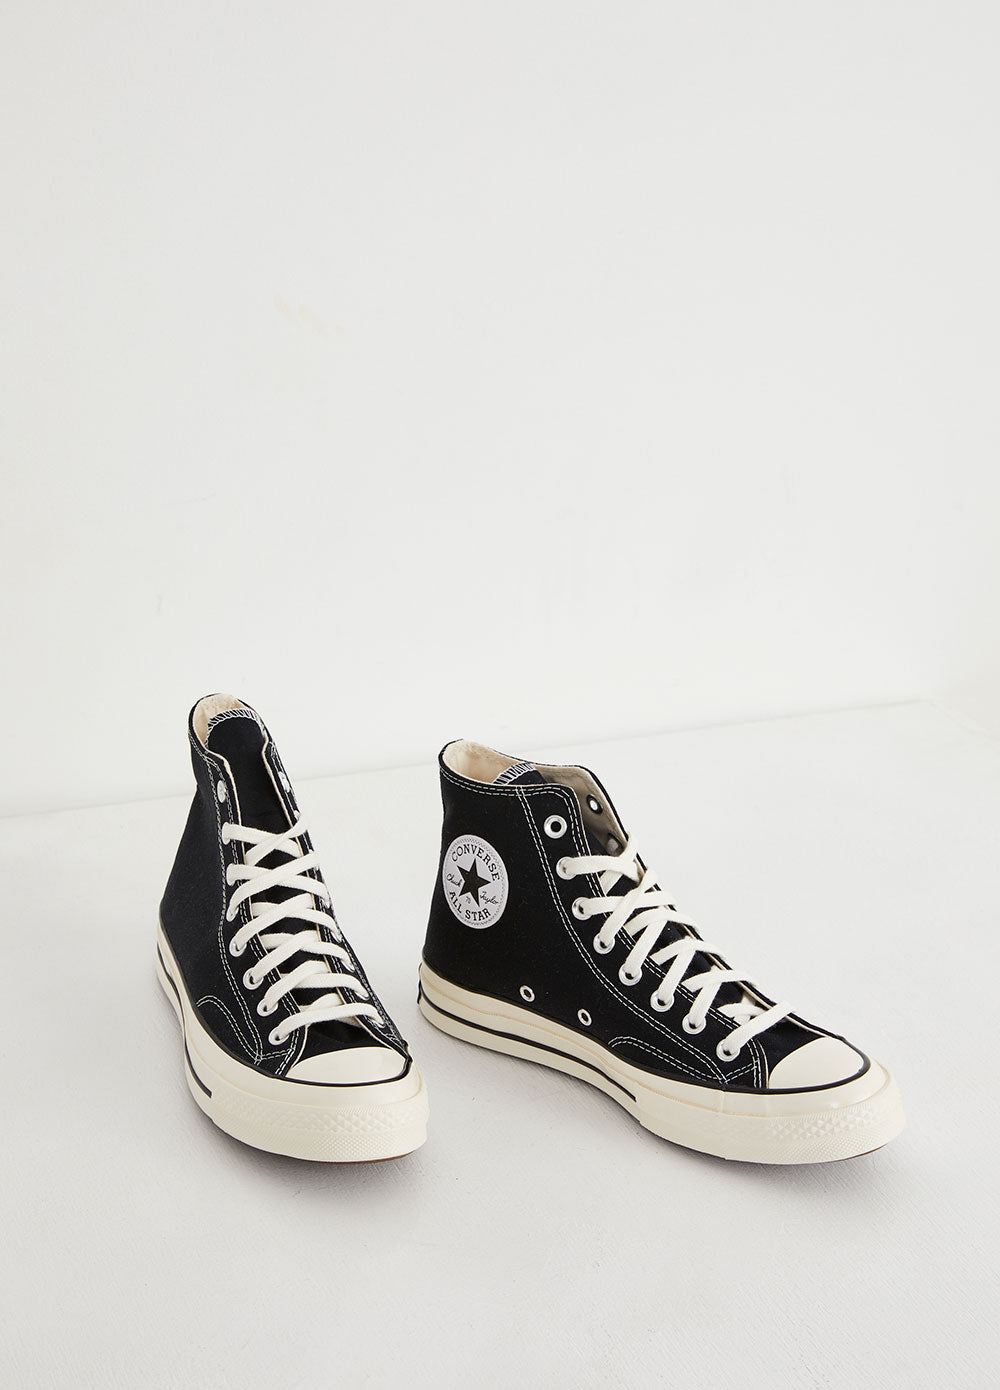 Chuck Taylor 70 High Sneakers